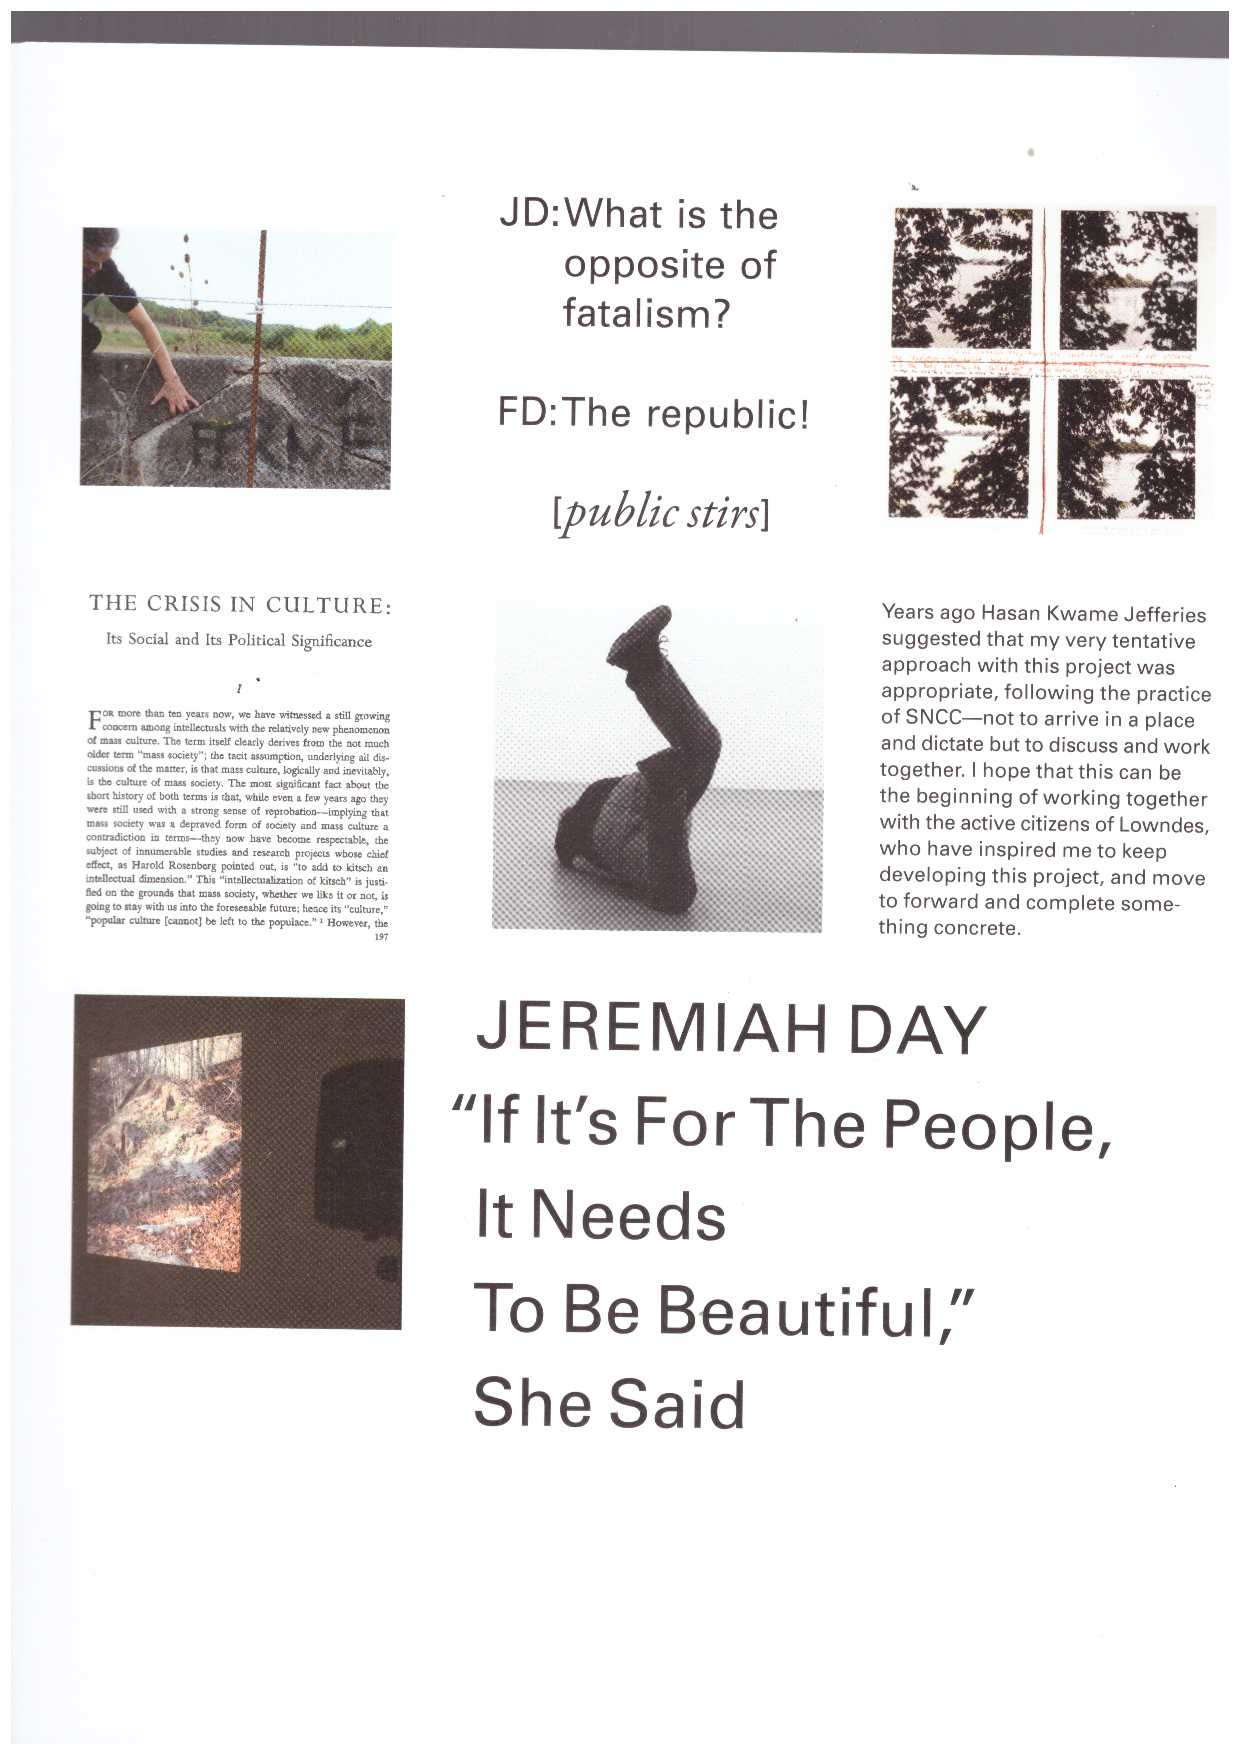 DAY, Jeremiah - “If It’s For The People, It Needs To Be Beautiful,” She Said